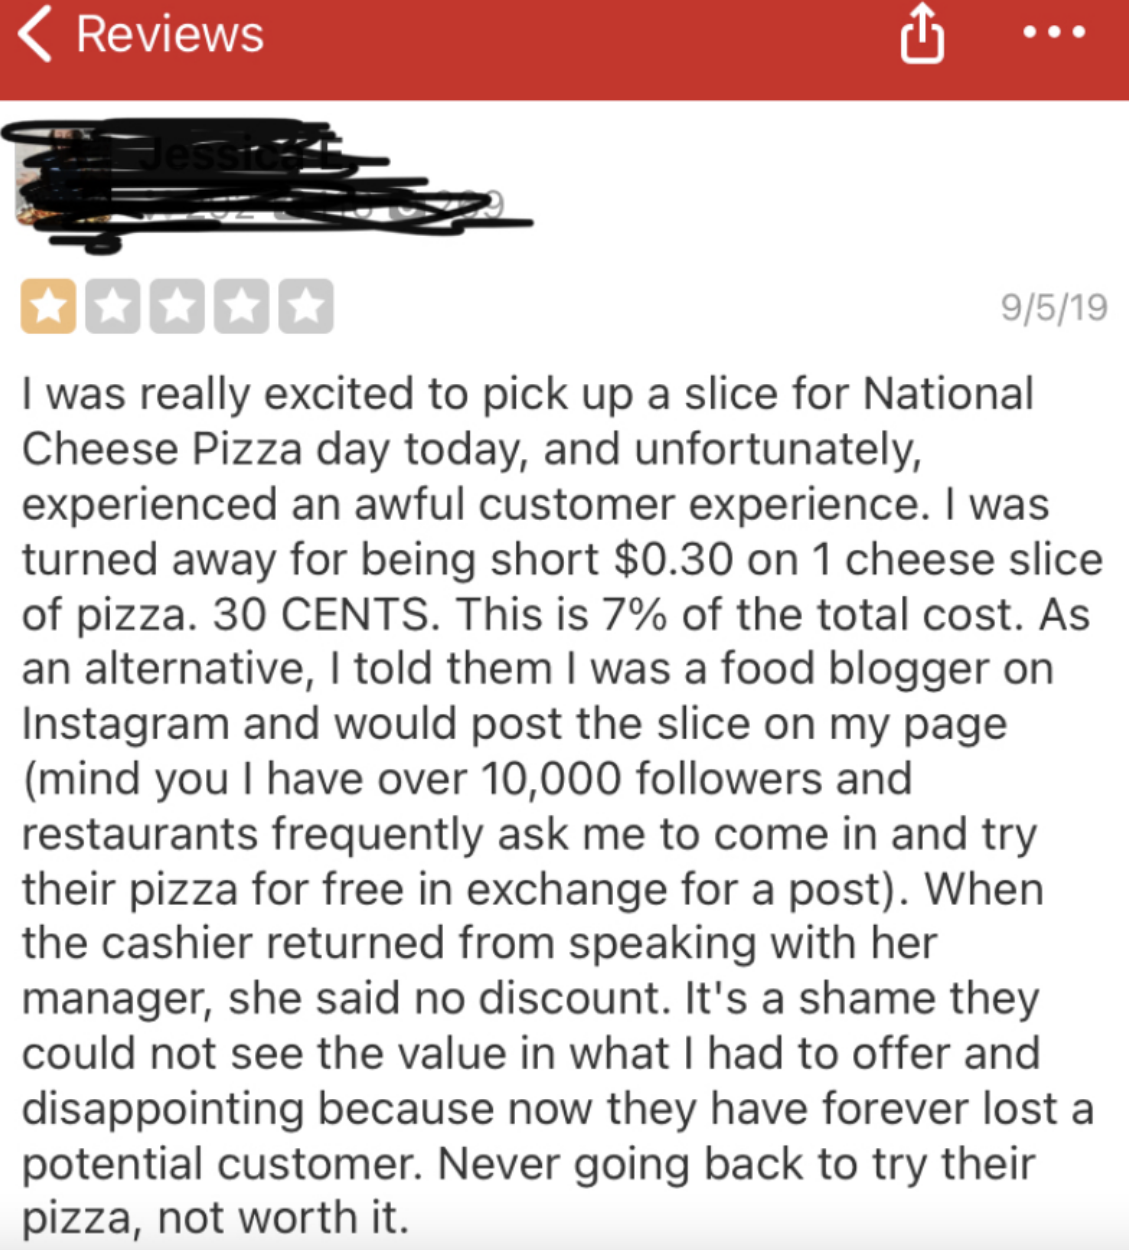 &quot;Never going back to try their pizza, not worth it.&quot;